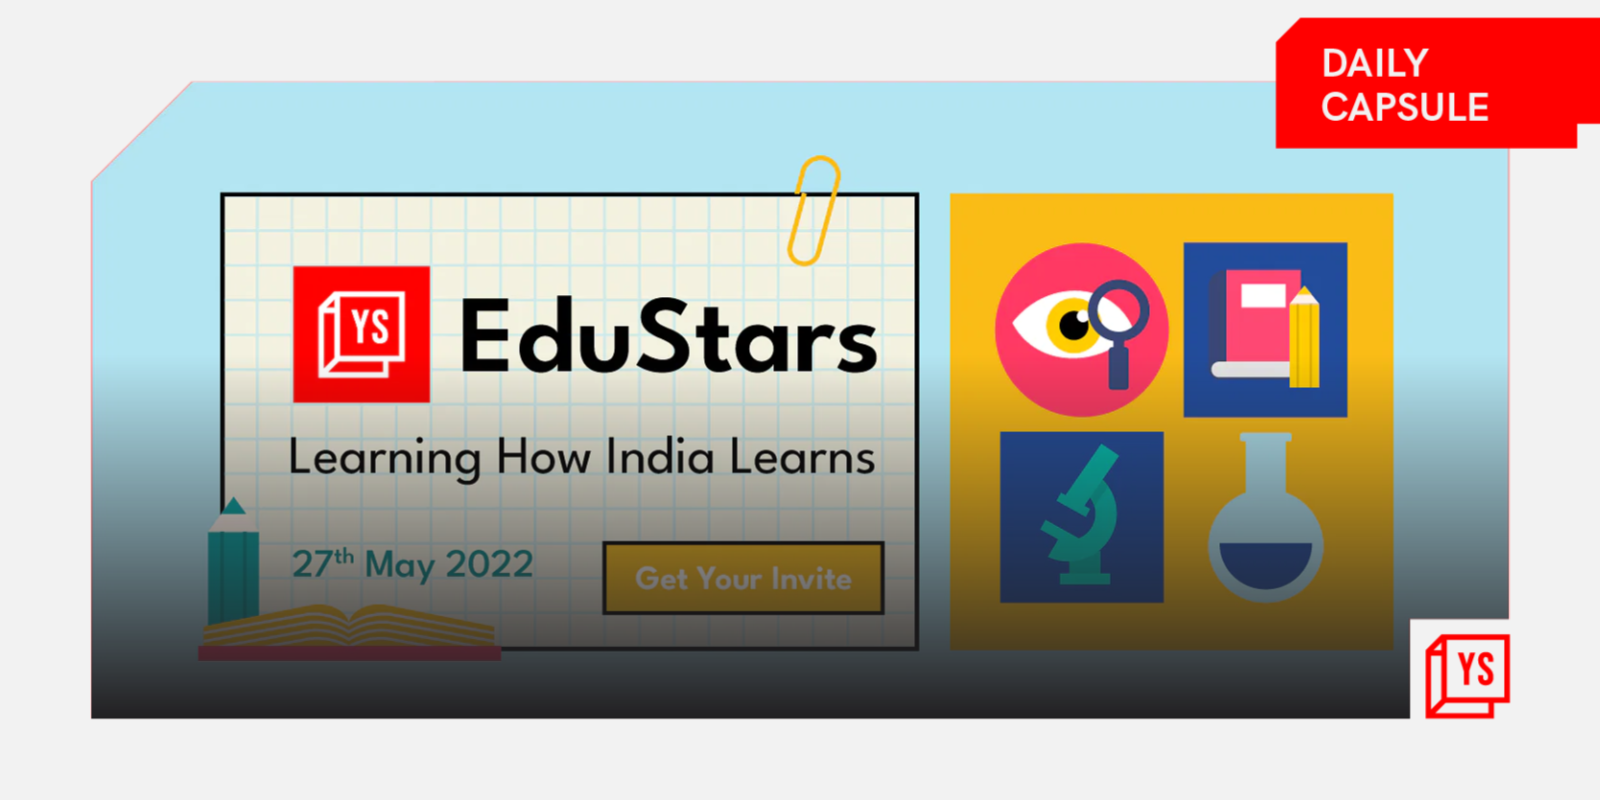 Catch all the action at EduStars 2022